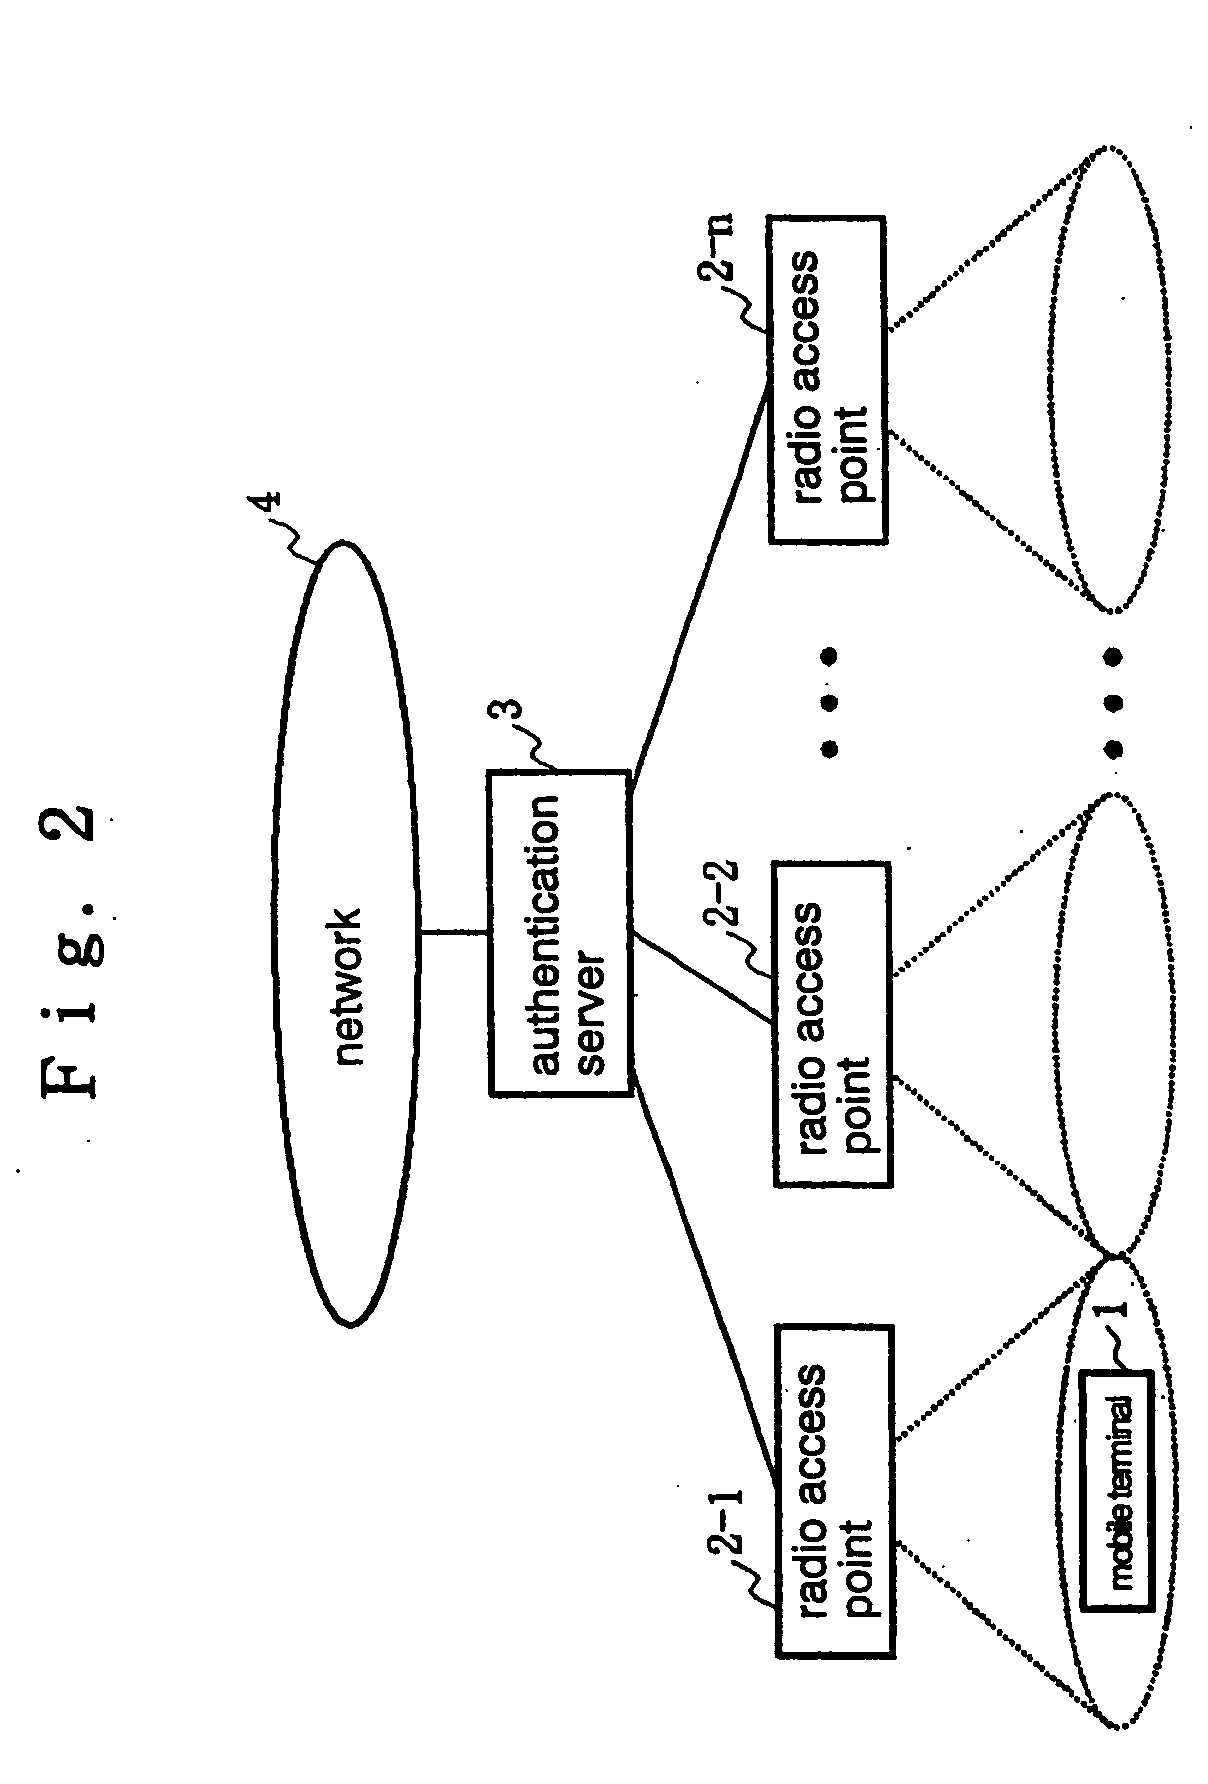 Mobile terminal authentication method capable of reducing authentication processing time and preventing fraudulent transmission/reception of data through spoofing